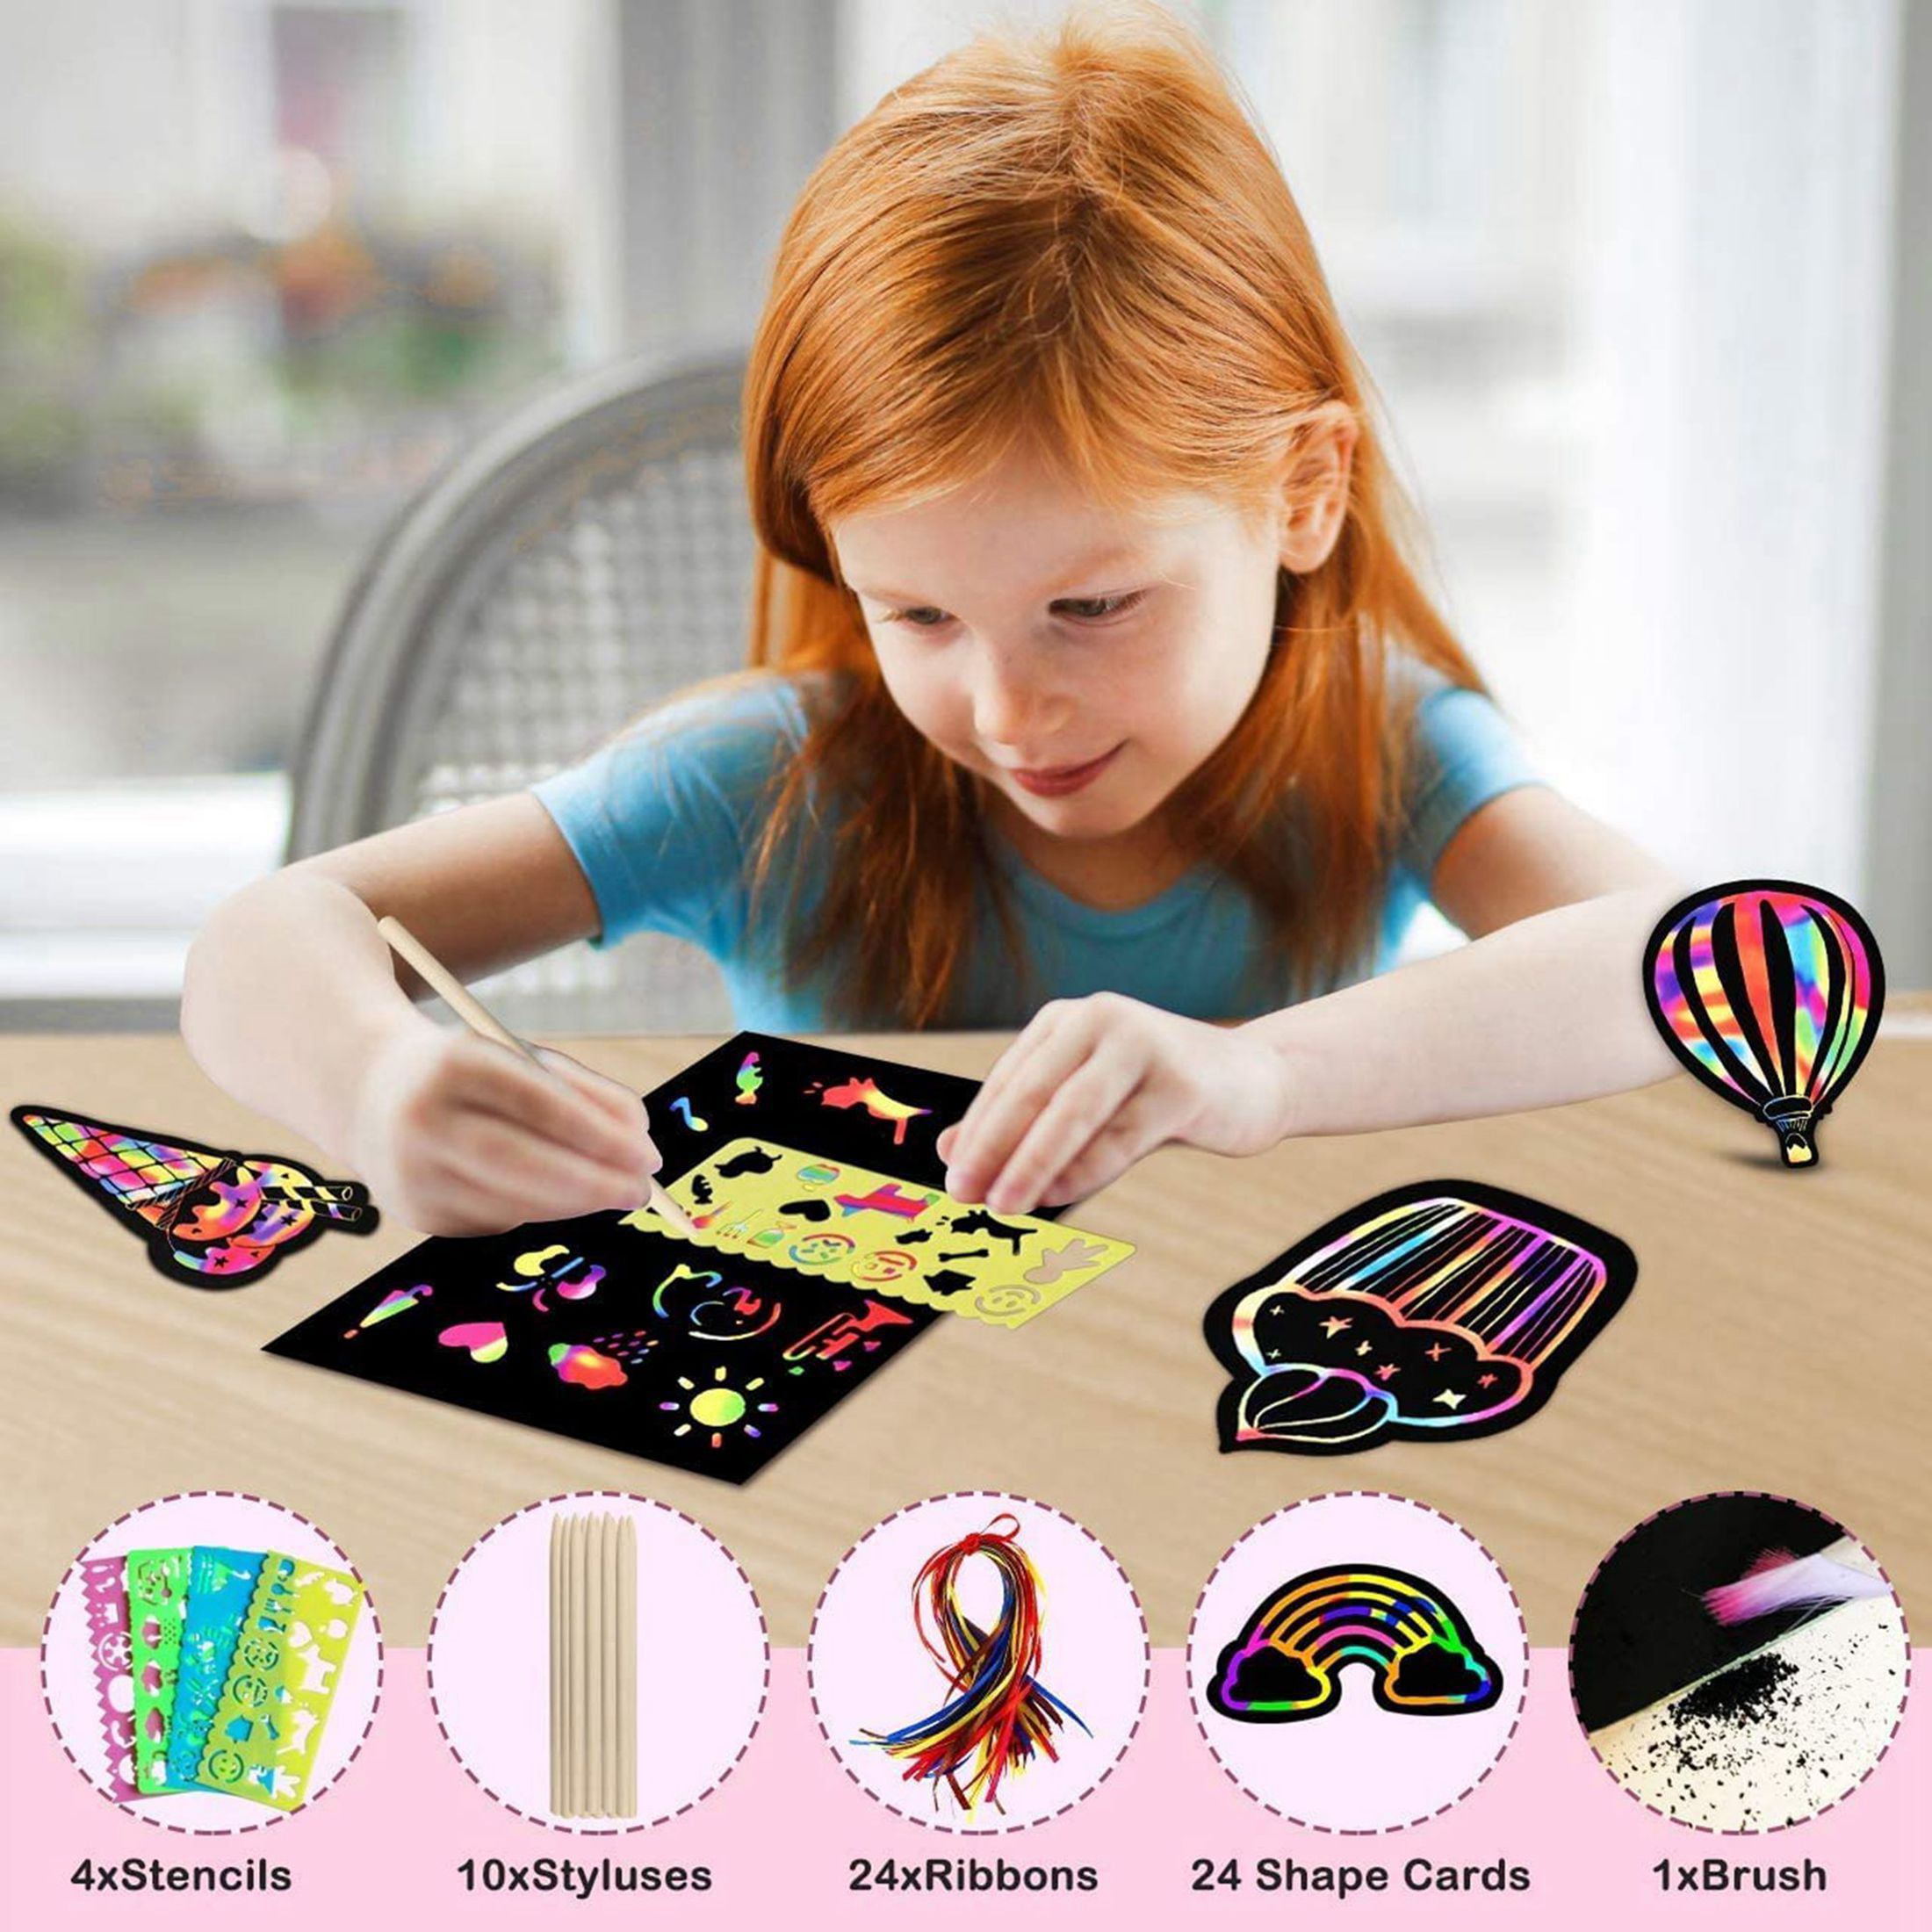 ZMLM Scratch Paper Art Set for Kids: Magic Drawing Art Craft Kid Black  Scratch Off Paper Supply Kit for Age 3 4 5 6 7 8 9 10 Girl Boy  Holiday|Party